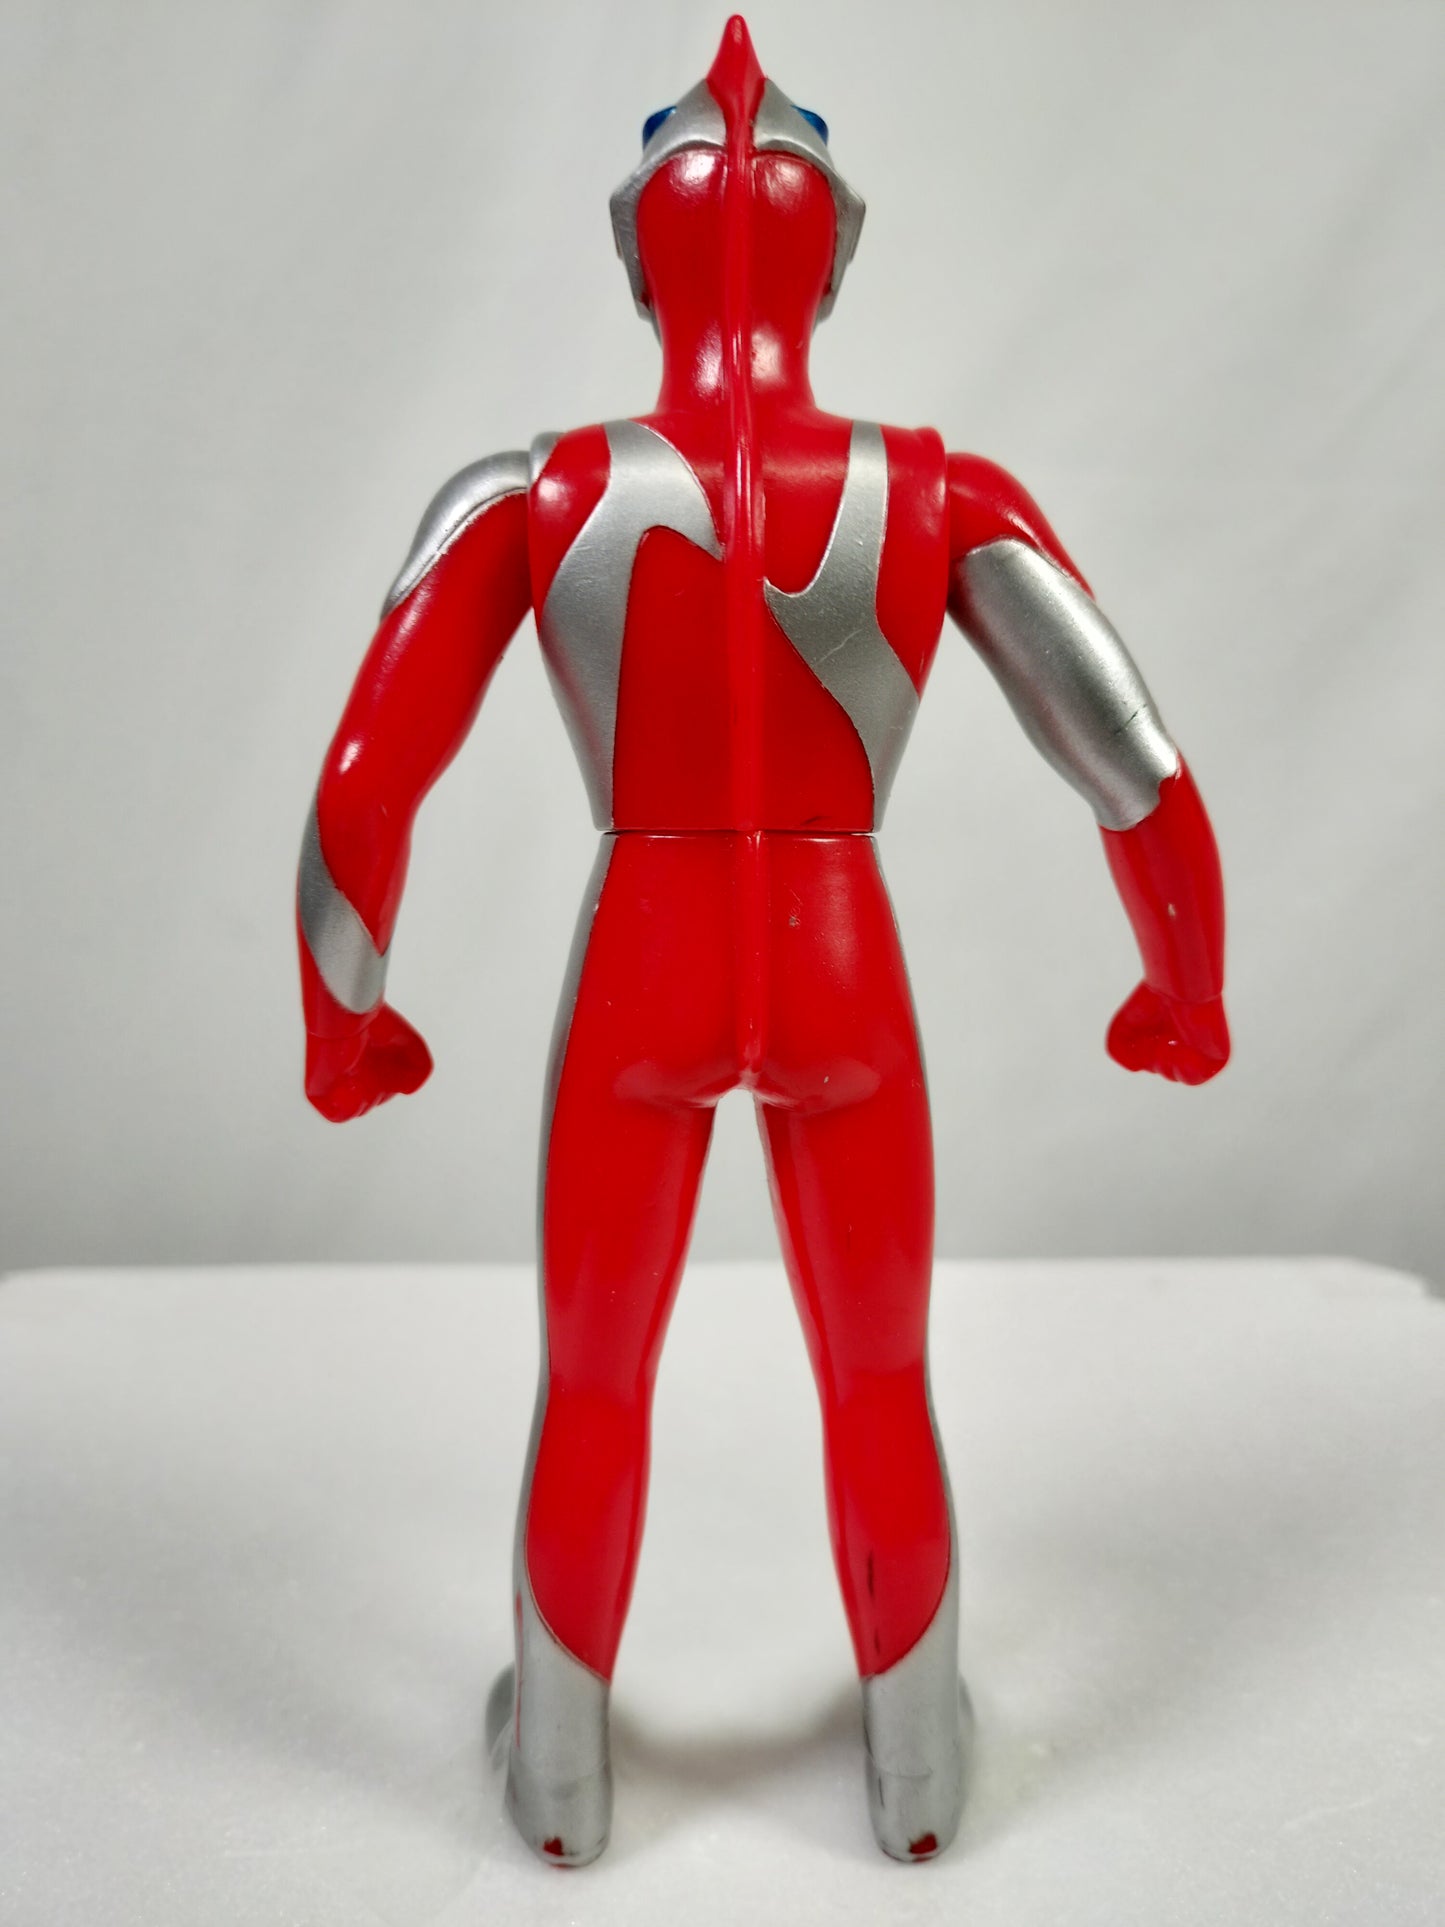 Ultraman Nice Made in China Height about 16cm Manufactured in 1999 Sofvi Figure retro vintage major scratches and dirt